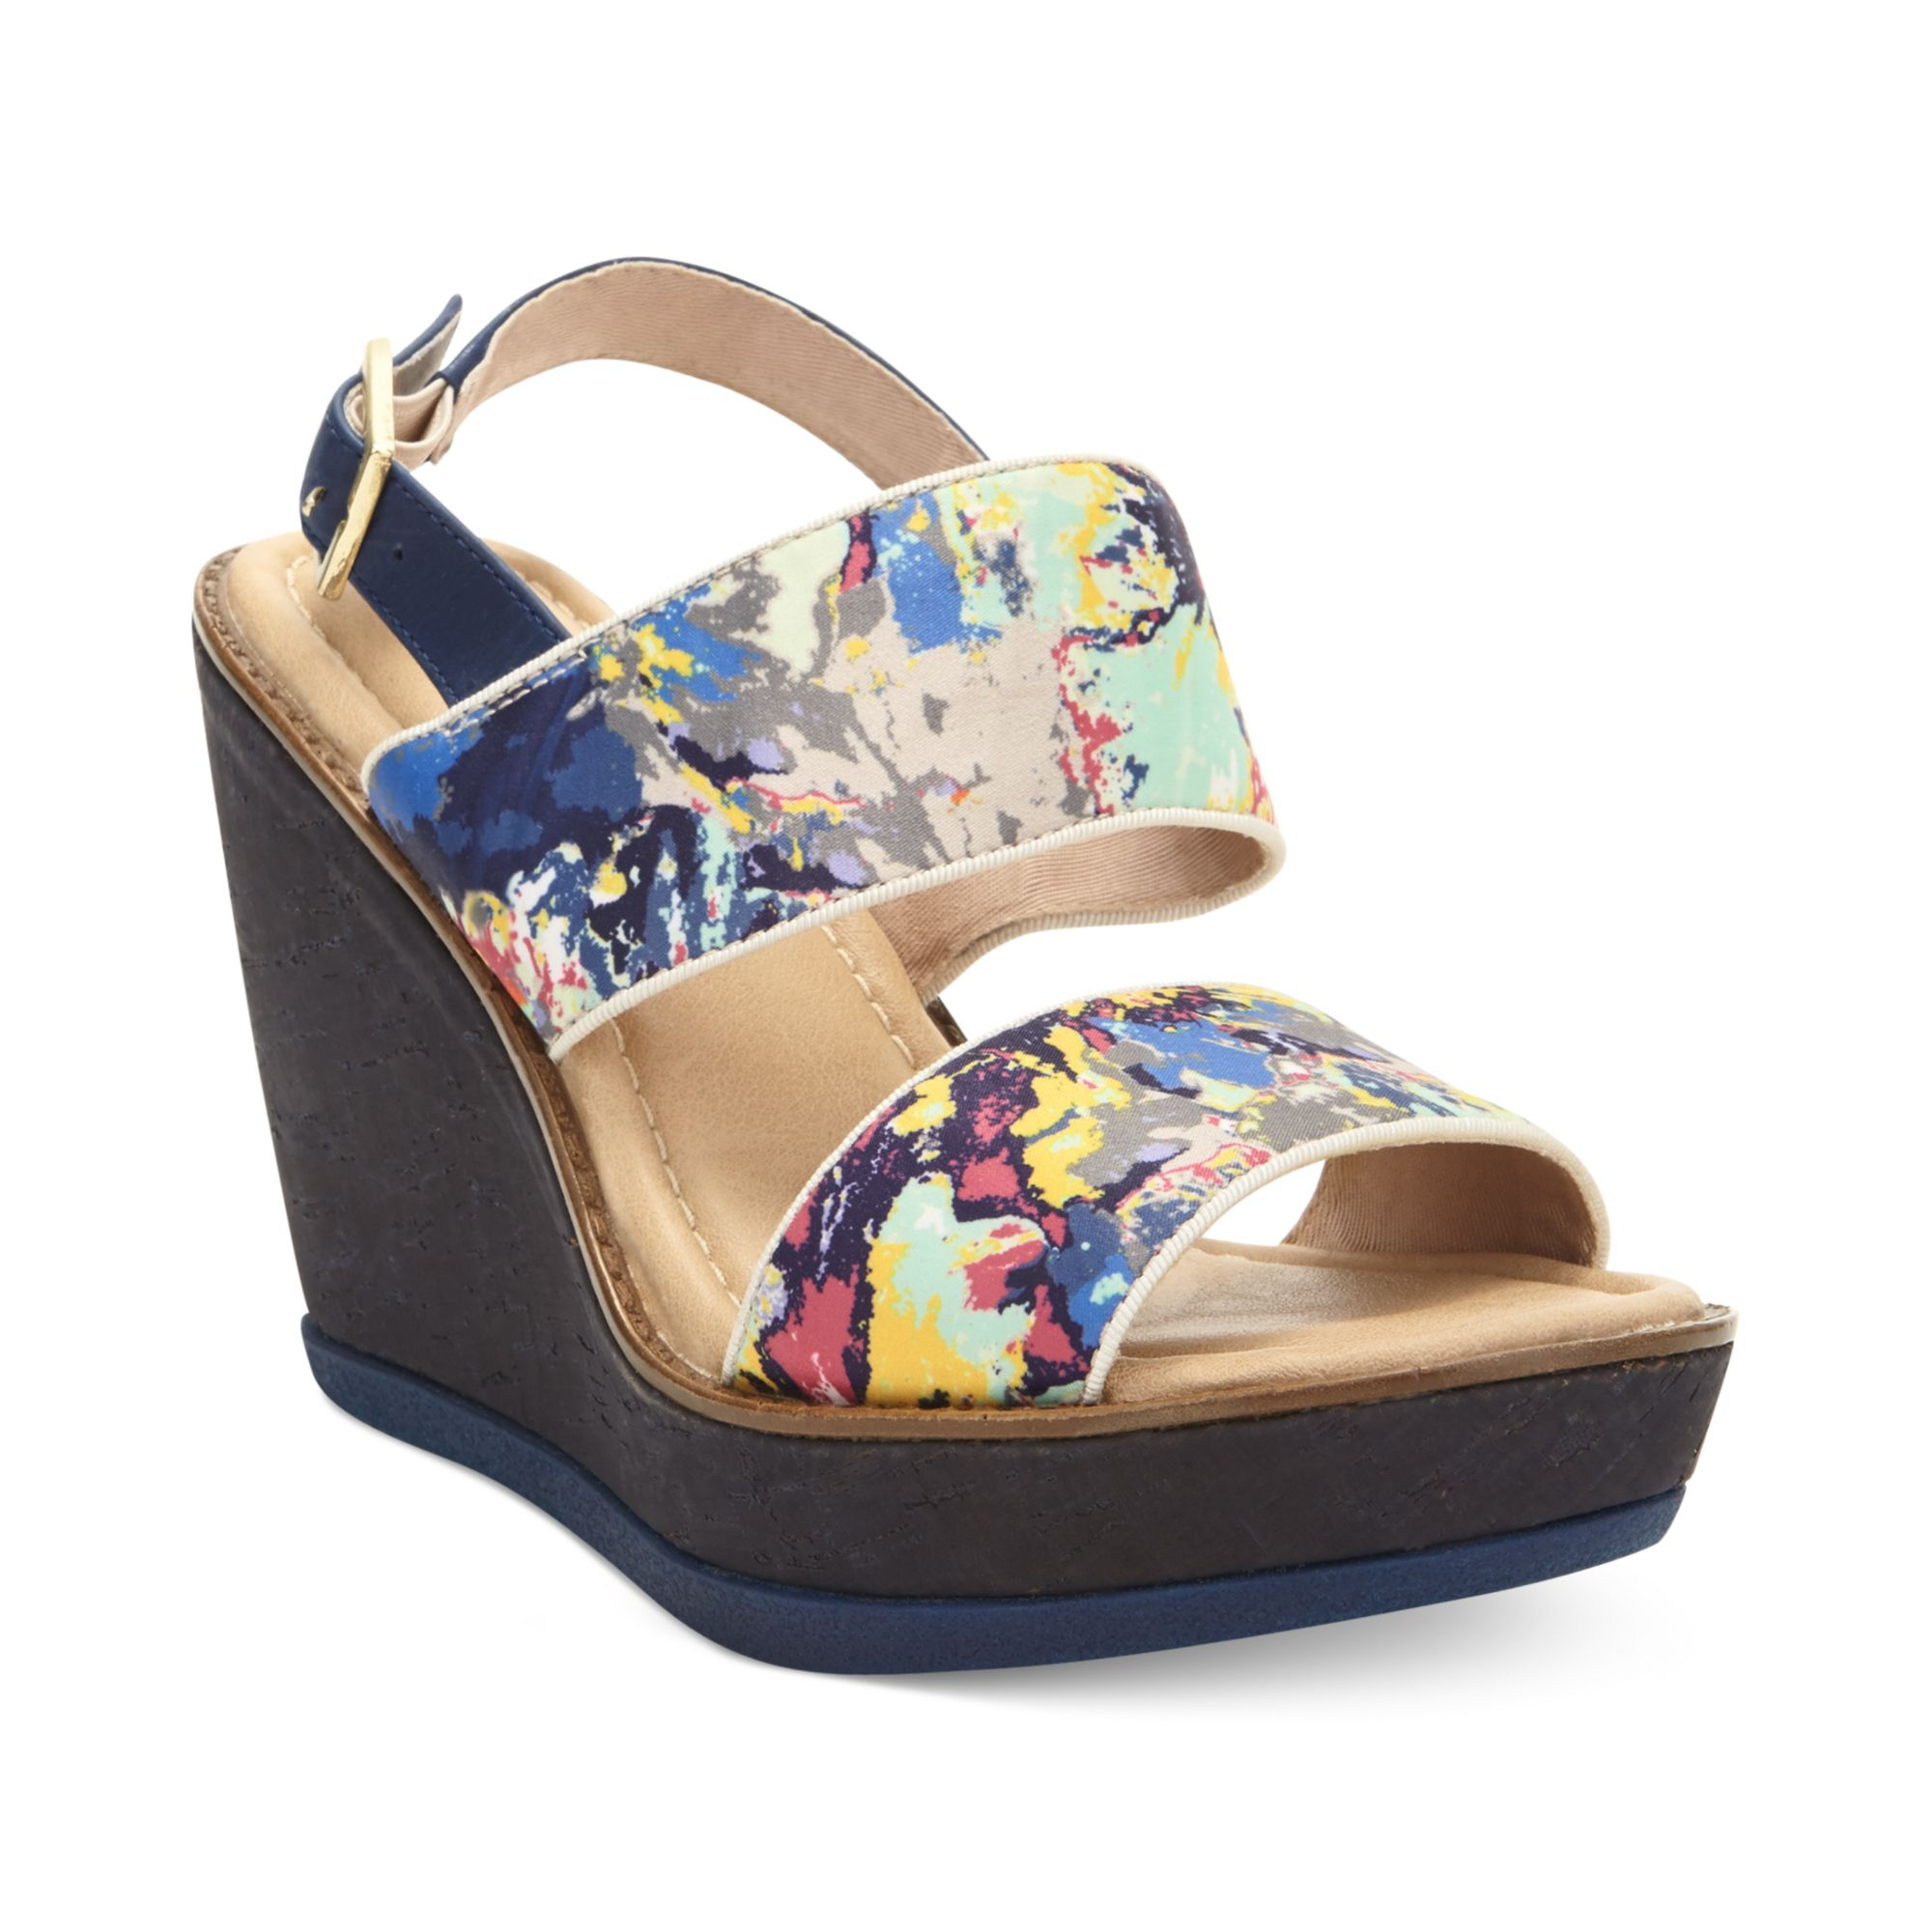 Hush Puppies Womens Cores Platform Wedge Sandals in Floral Print (Blue ...